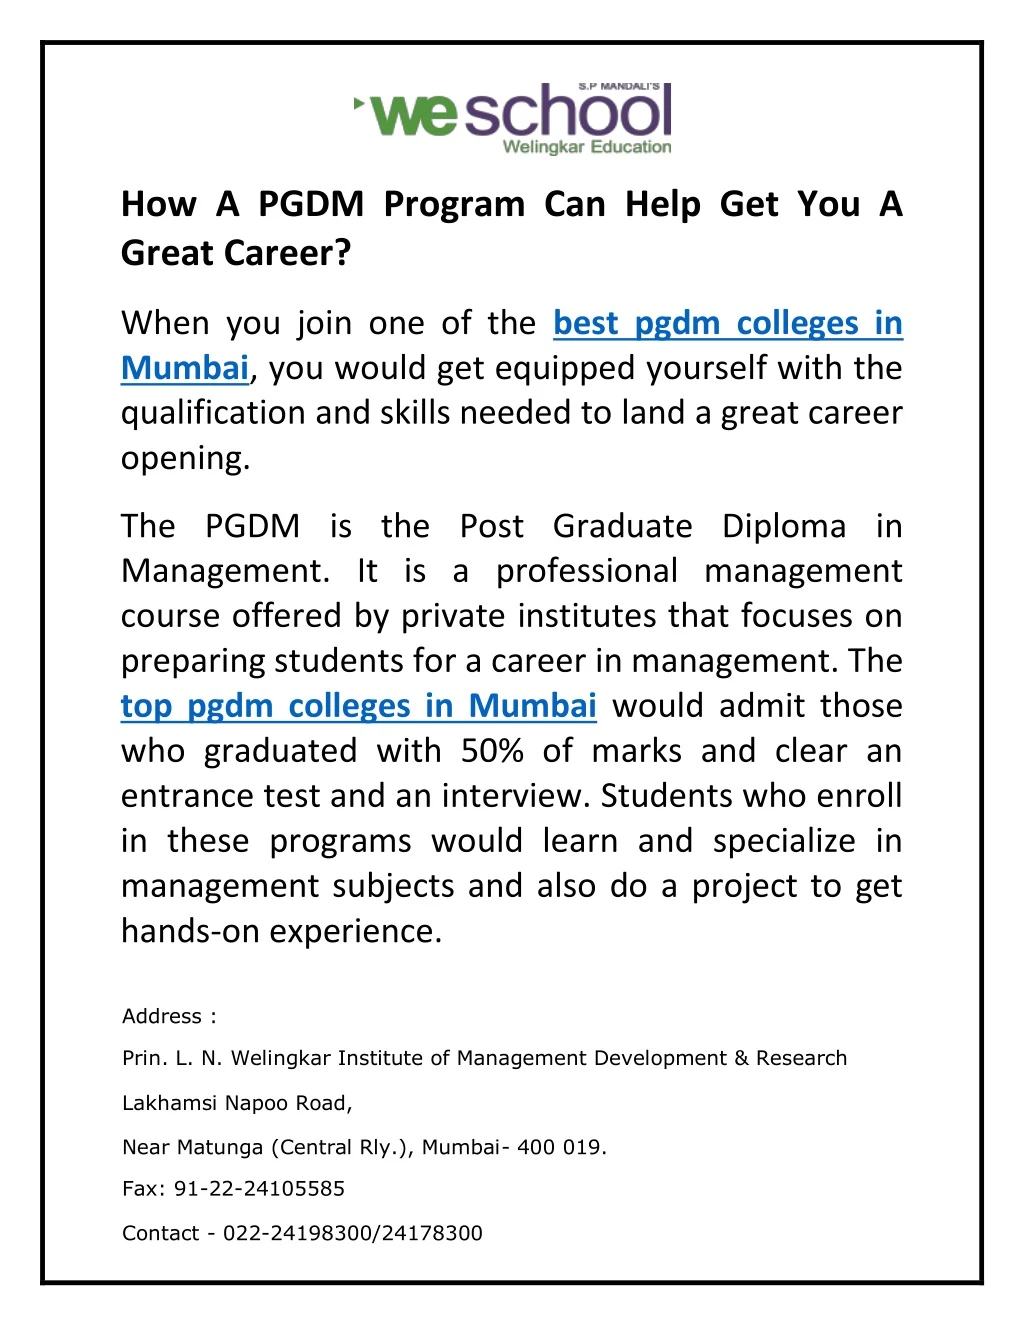 how a pgdm program can help get you a great career